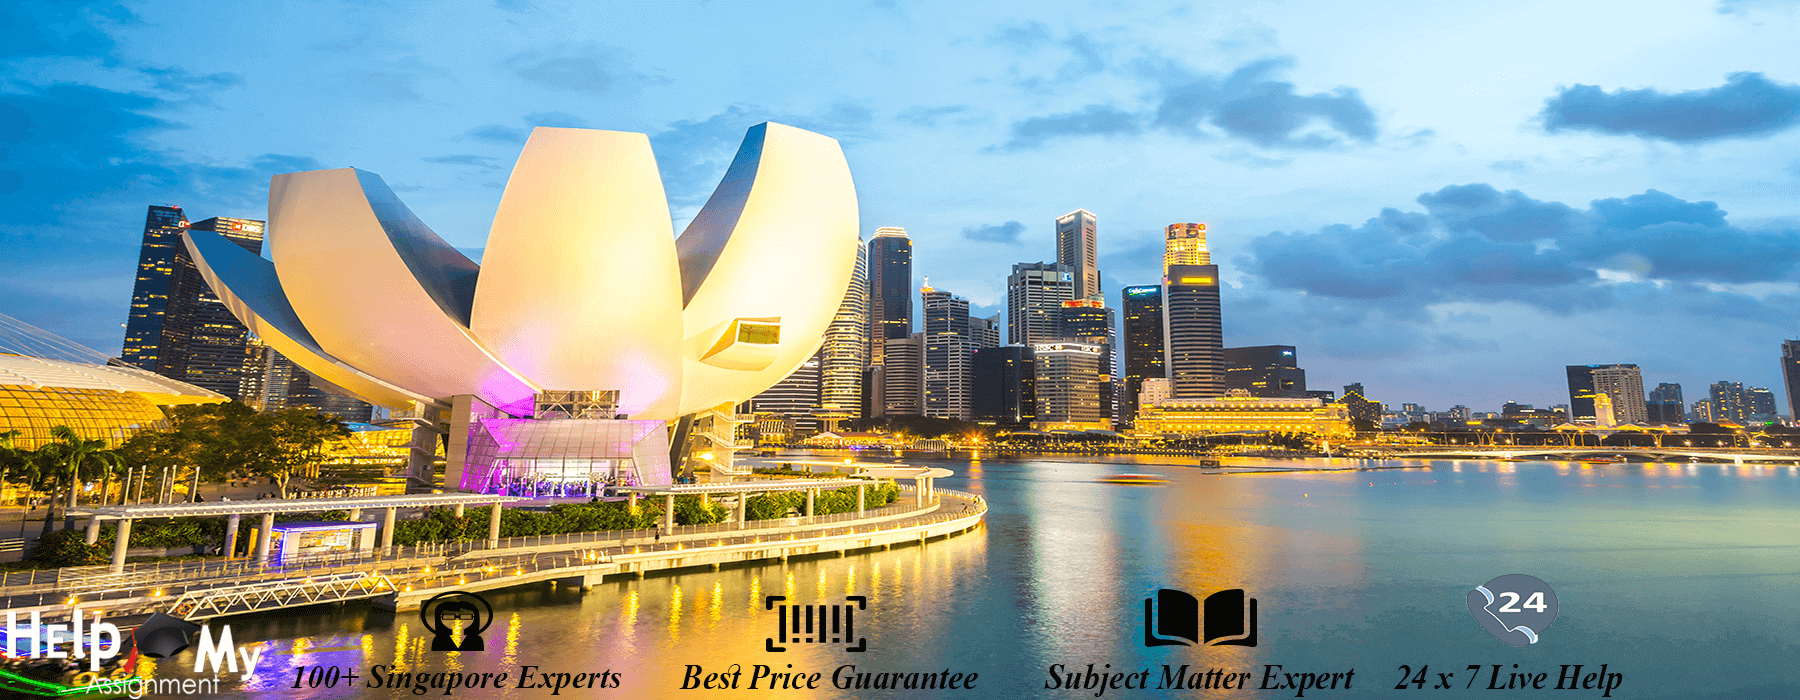 Help me to do my assignment in singapore